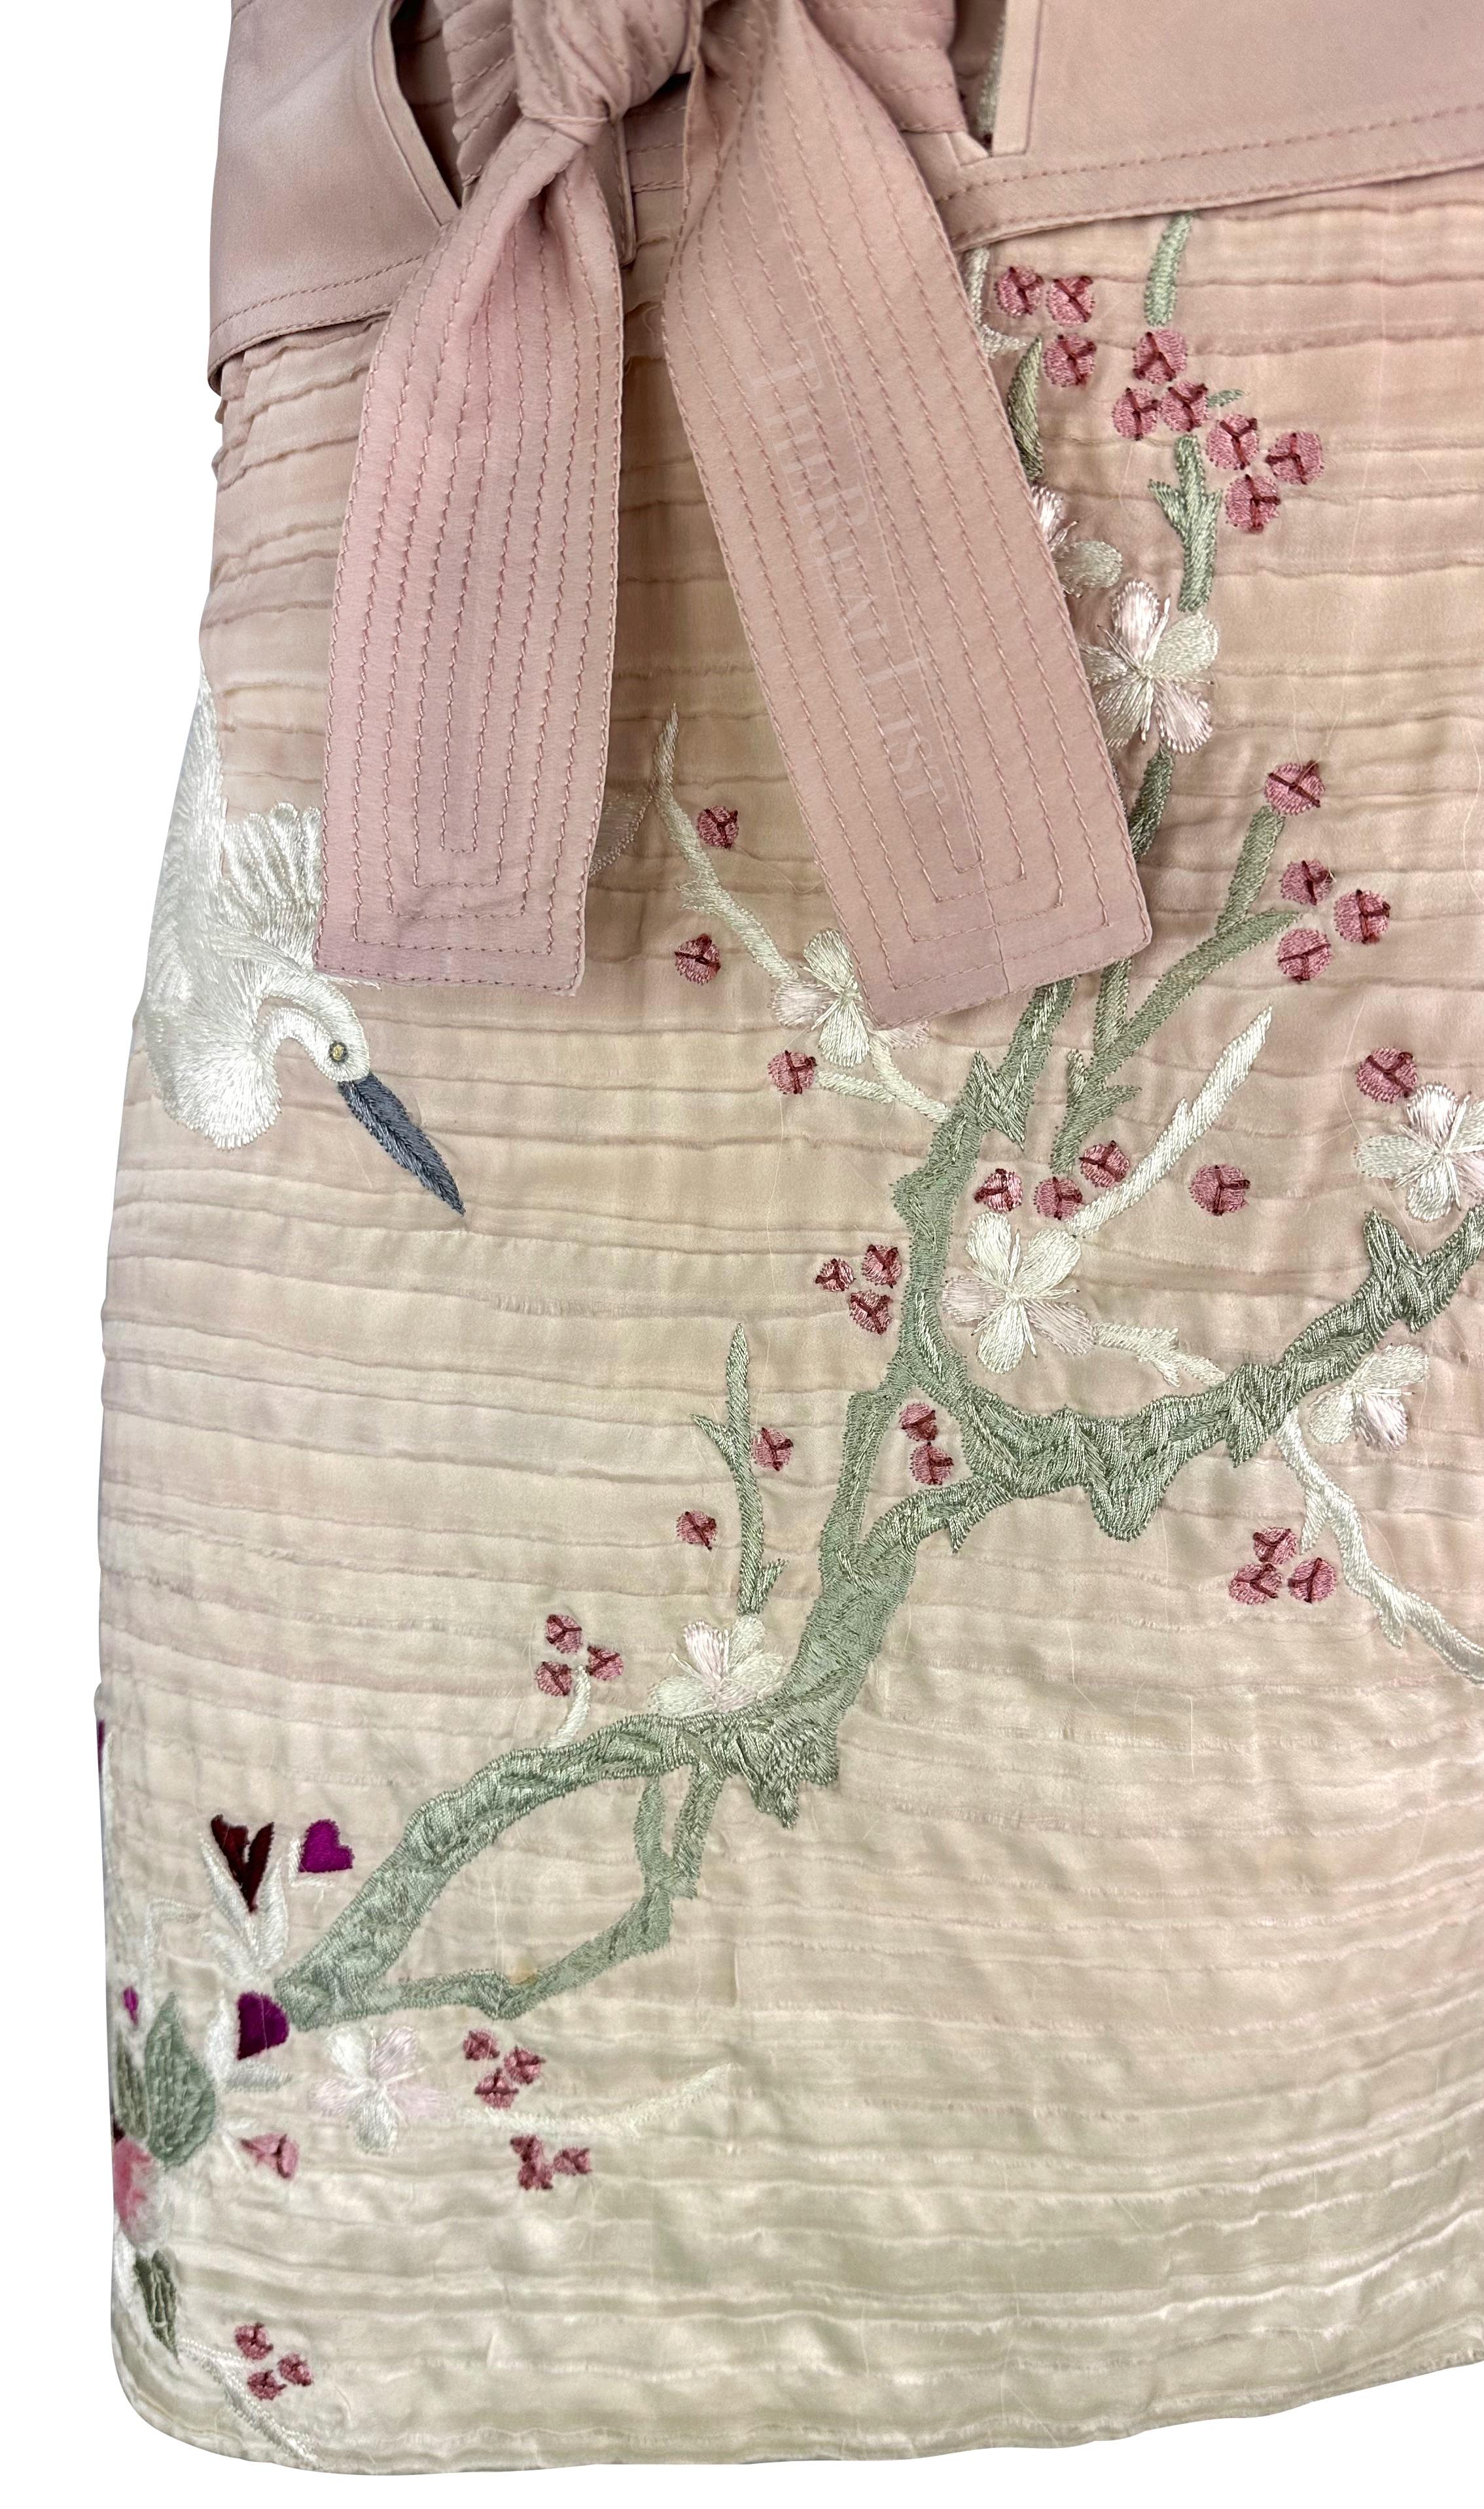 S/S 2003 Gucci by Tom Ford  Light Pink Cherry Blossom Embroidered Mini Skirt For Sale 1